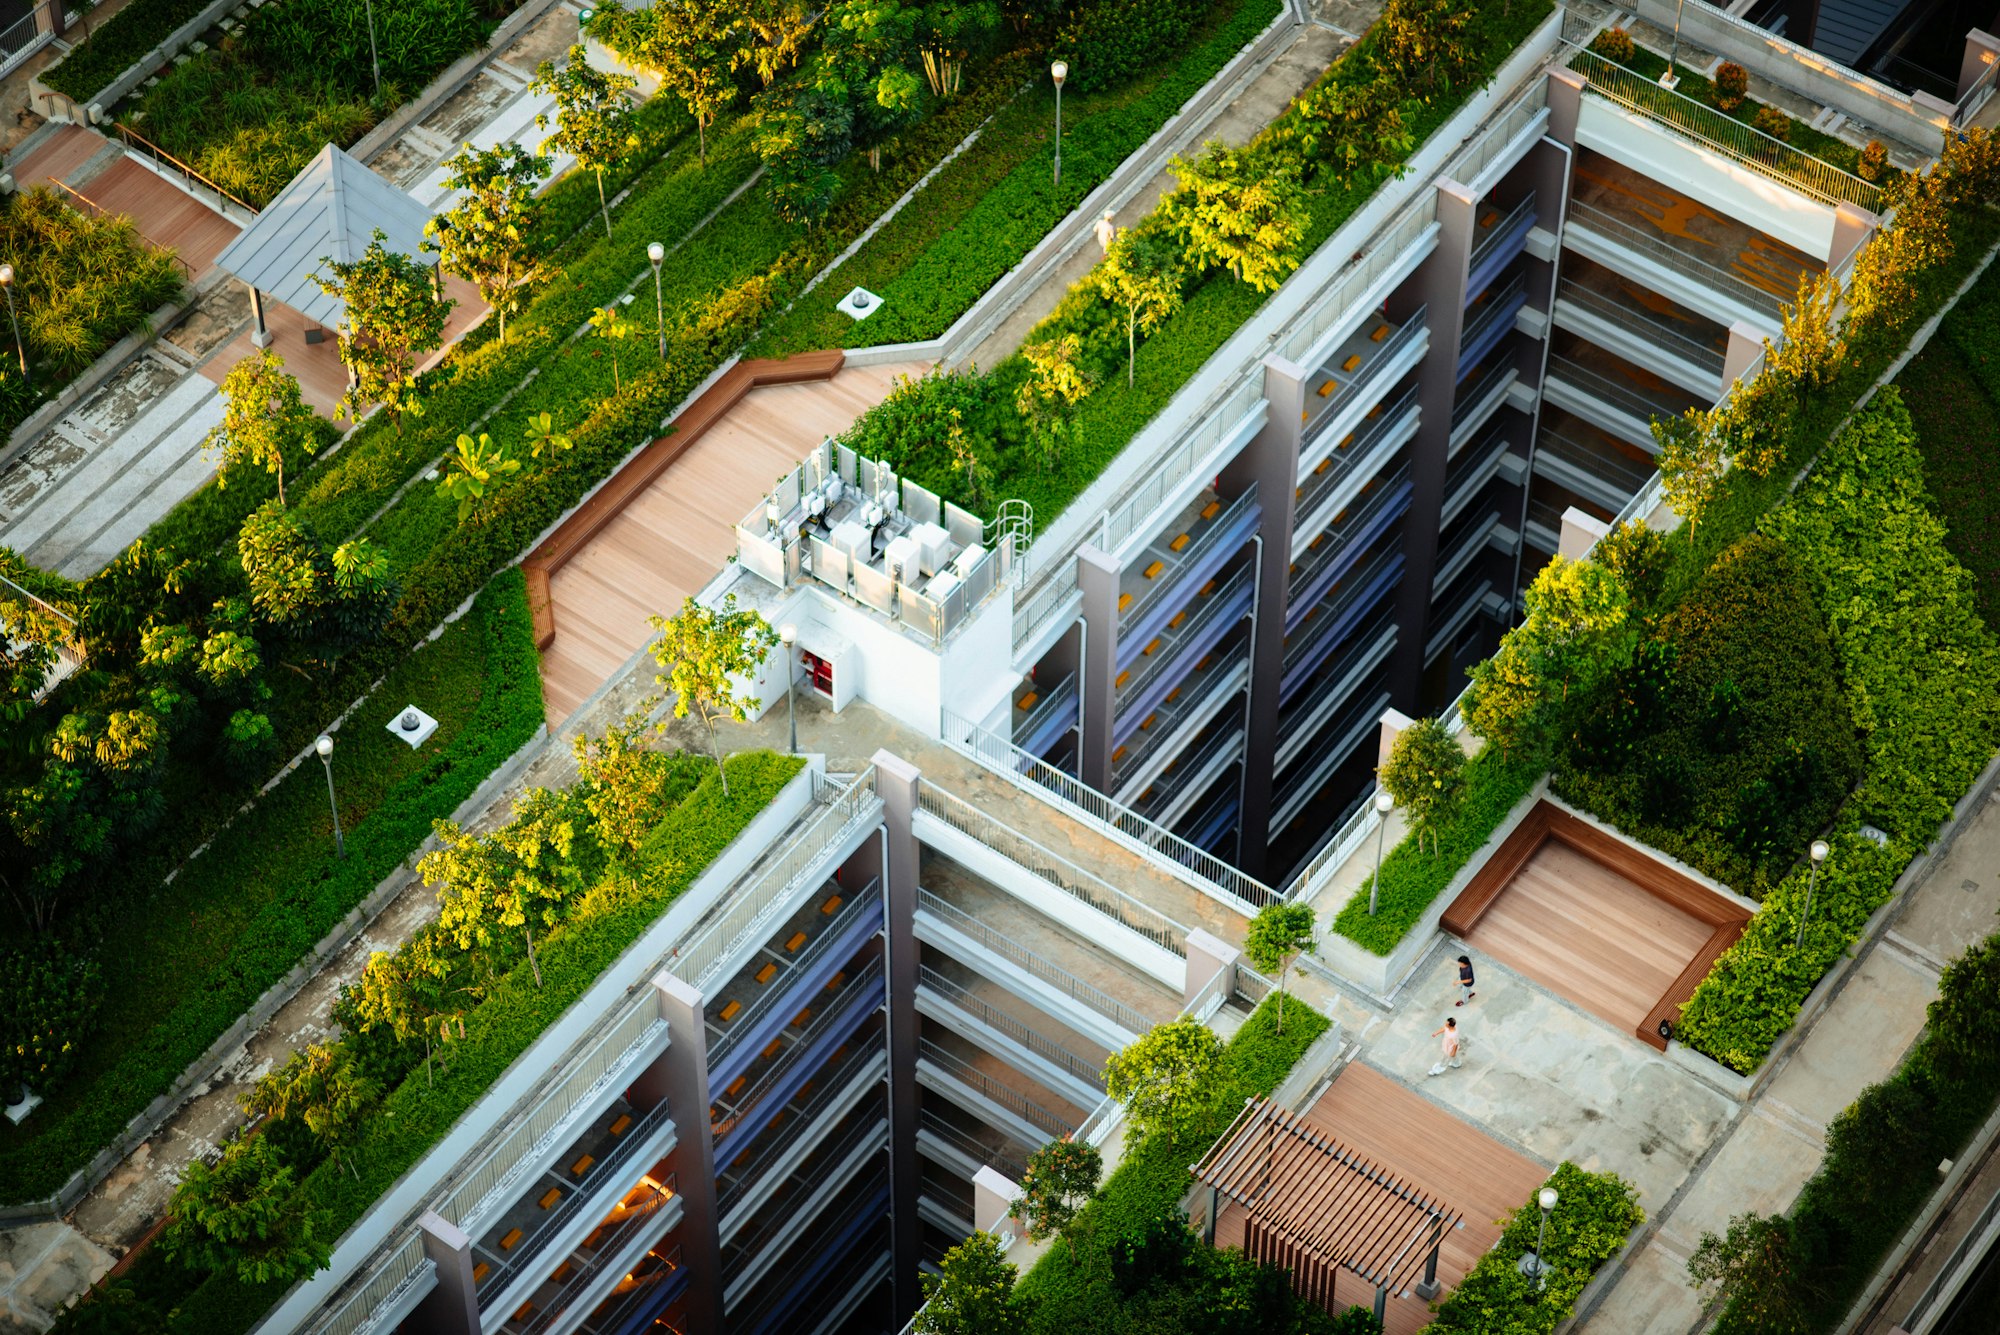 Aerial view of a green building with rooftop gardens